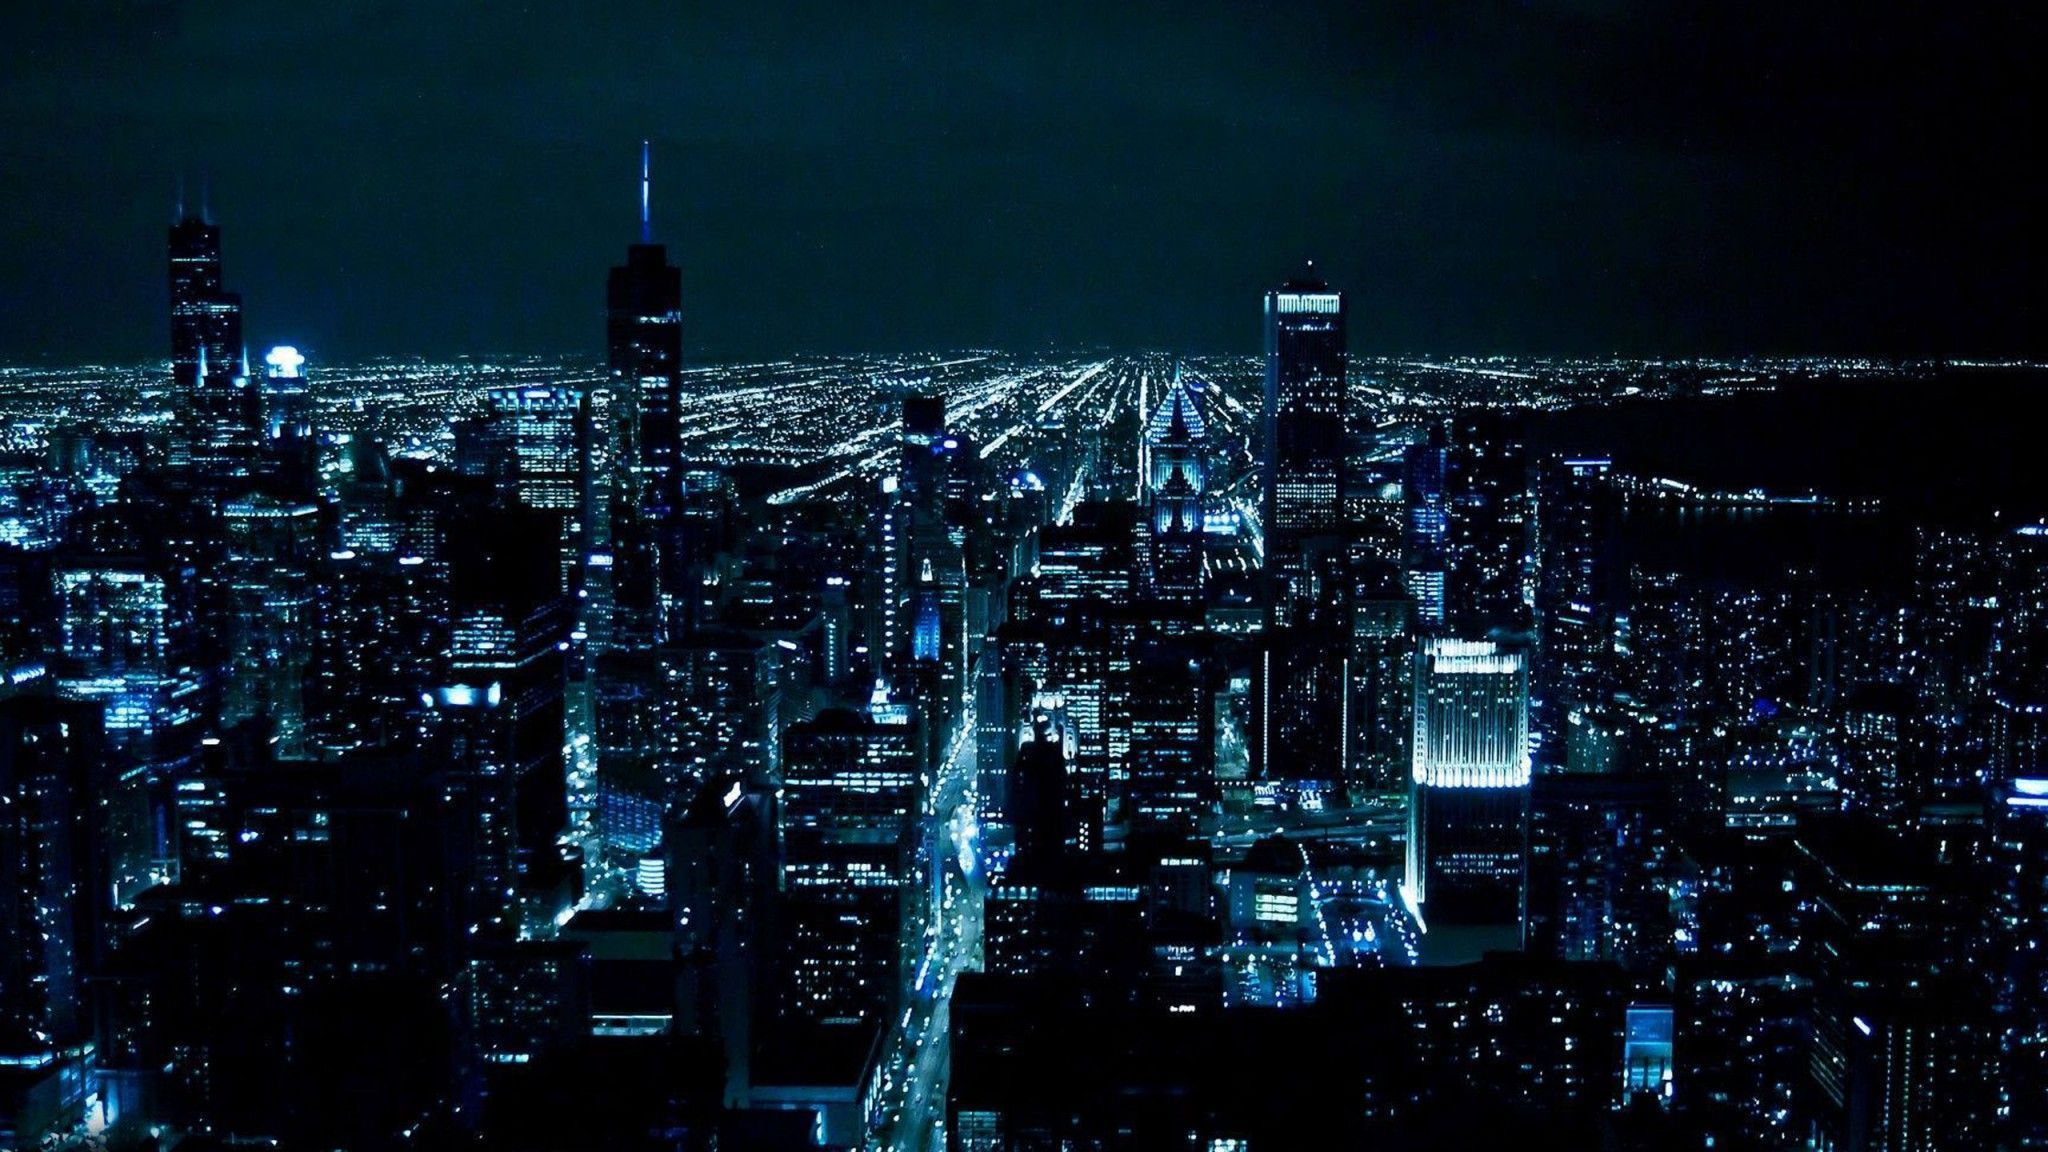 Chicago at night wallpaper | Wallpapers Design